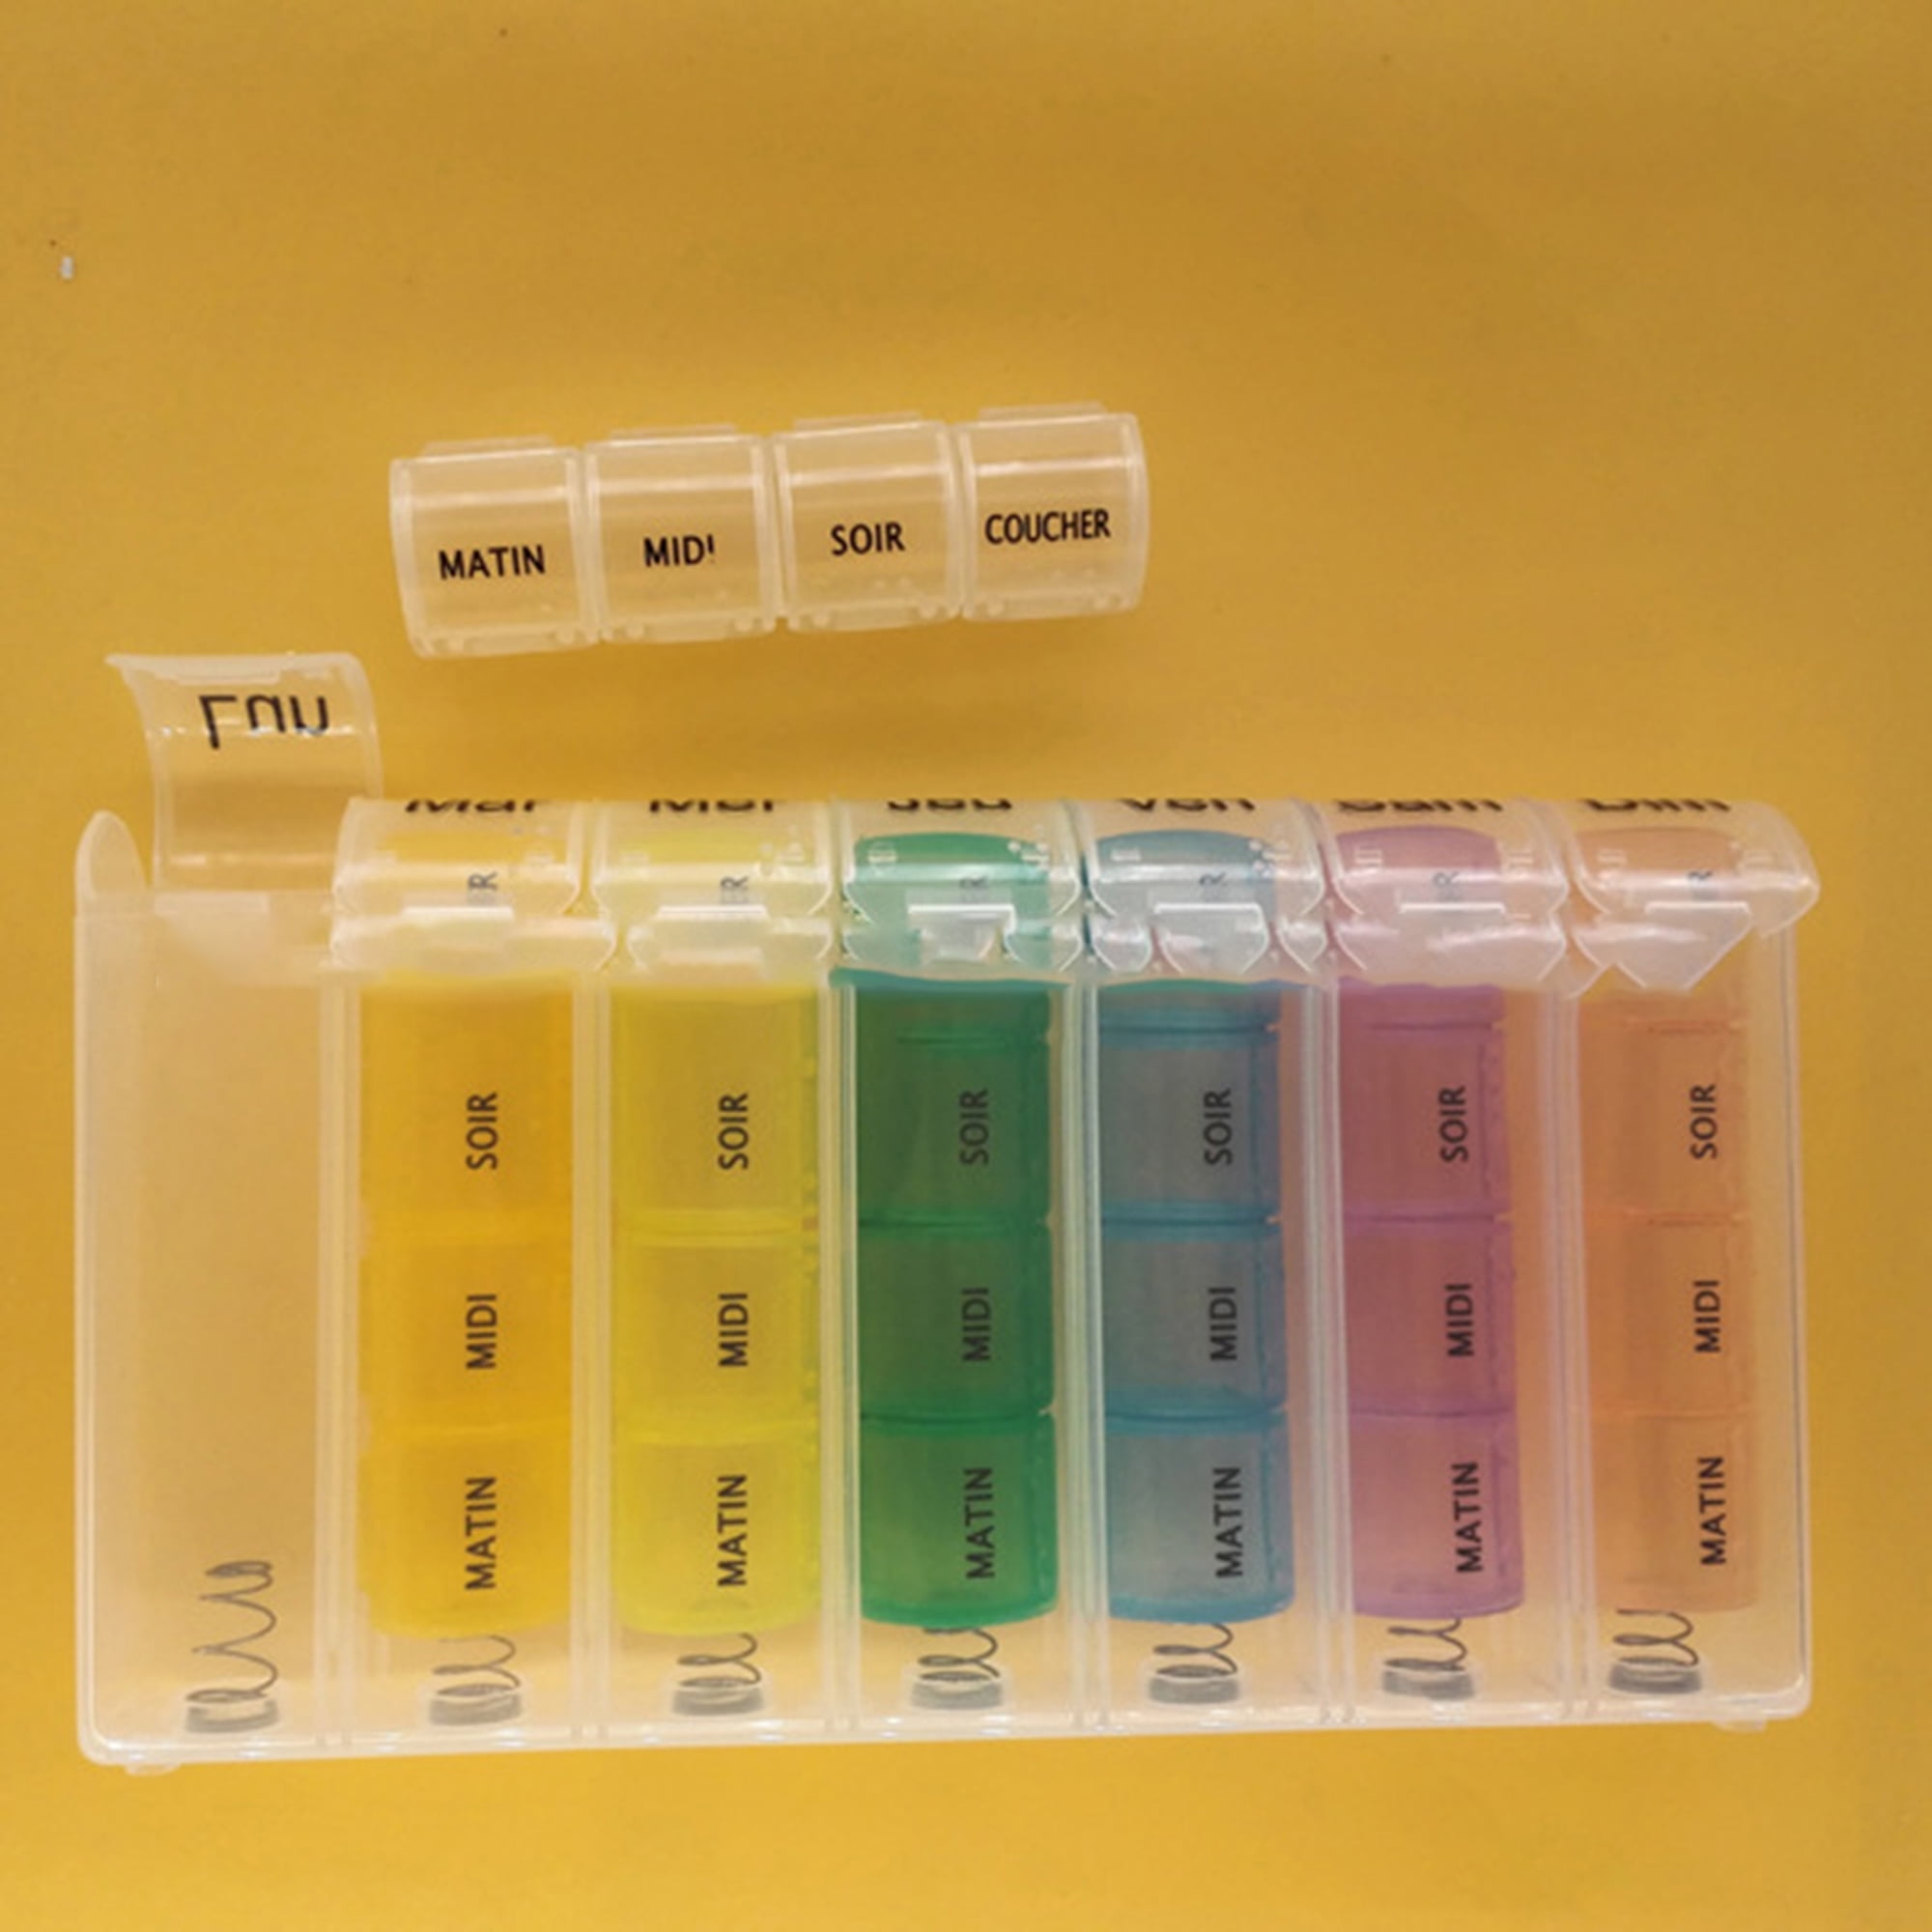 MOLN HYMY 7 Day Pill Organizer AM PM 2 Times a Day, Large Capacity